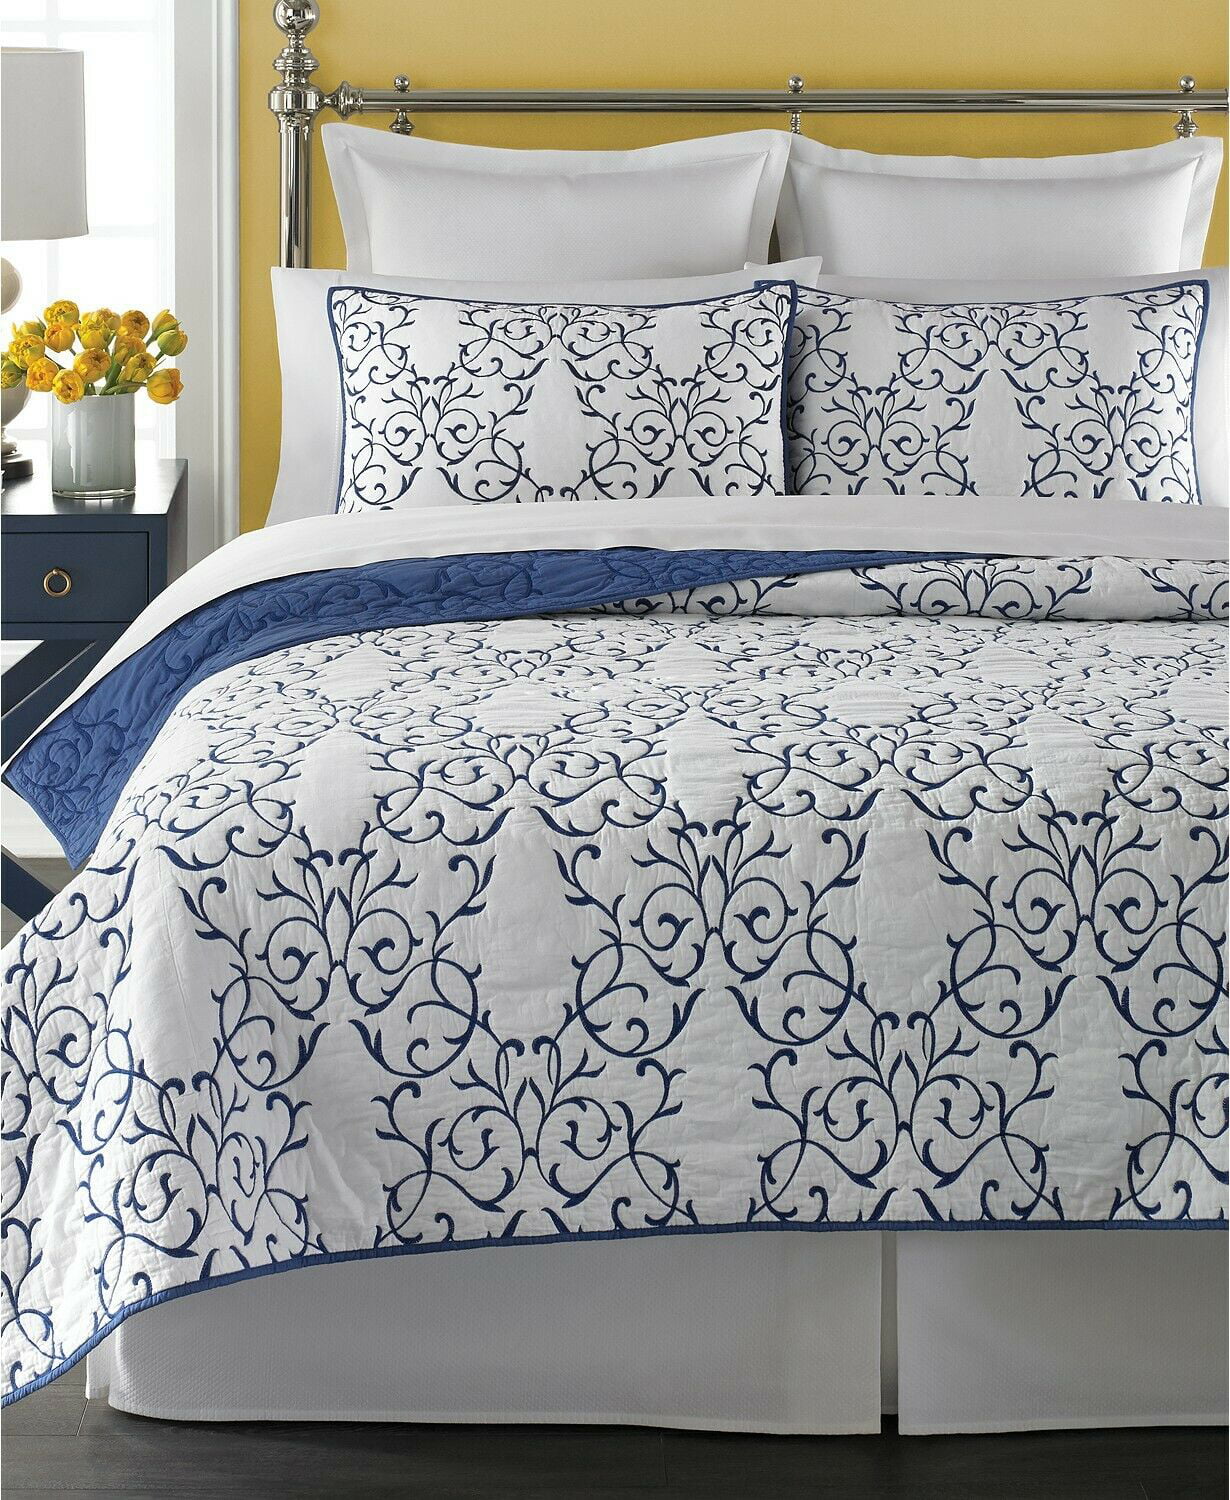 Martha Stewart Collection 100% Cotton Chateau Embroidered Quilt - KING